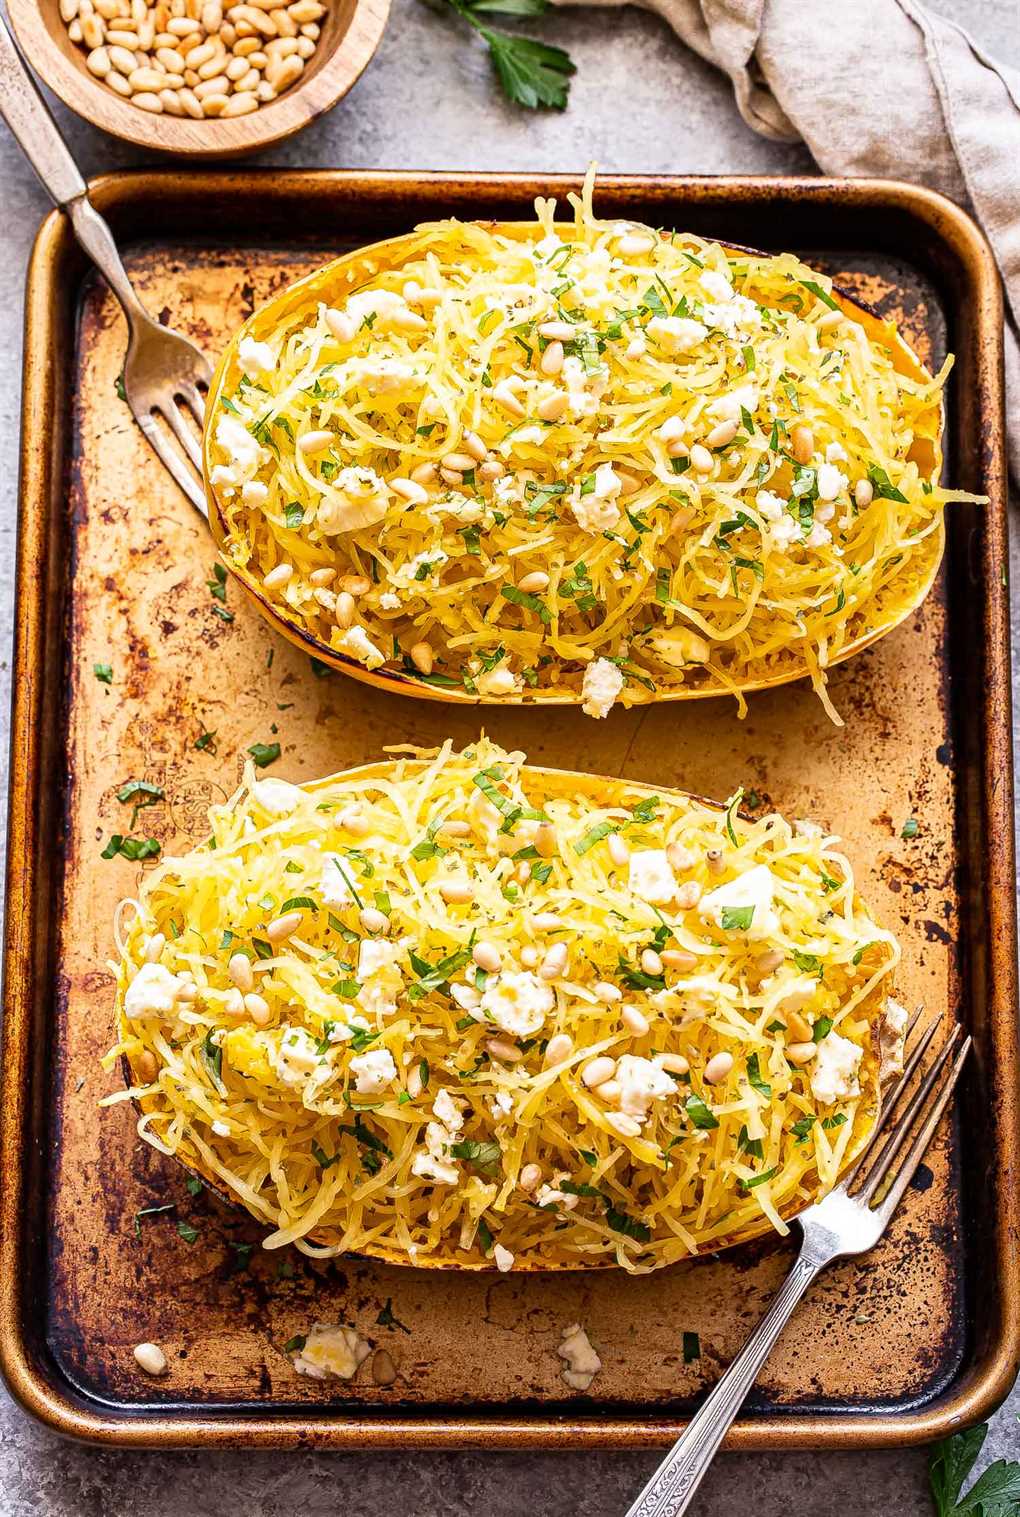 two halves of Spaghetti Squash with Feta and Herbs on a sheet pan with two forks.